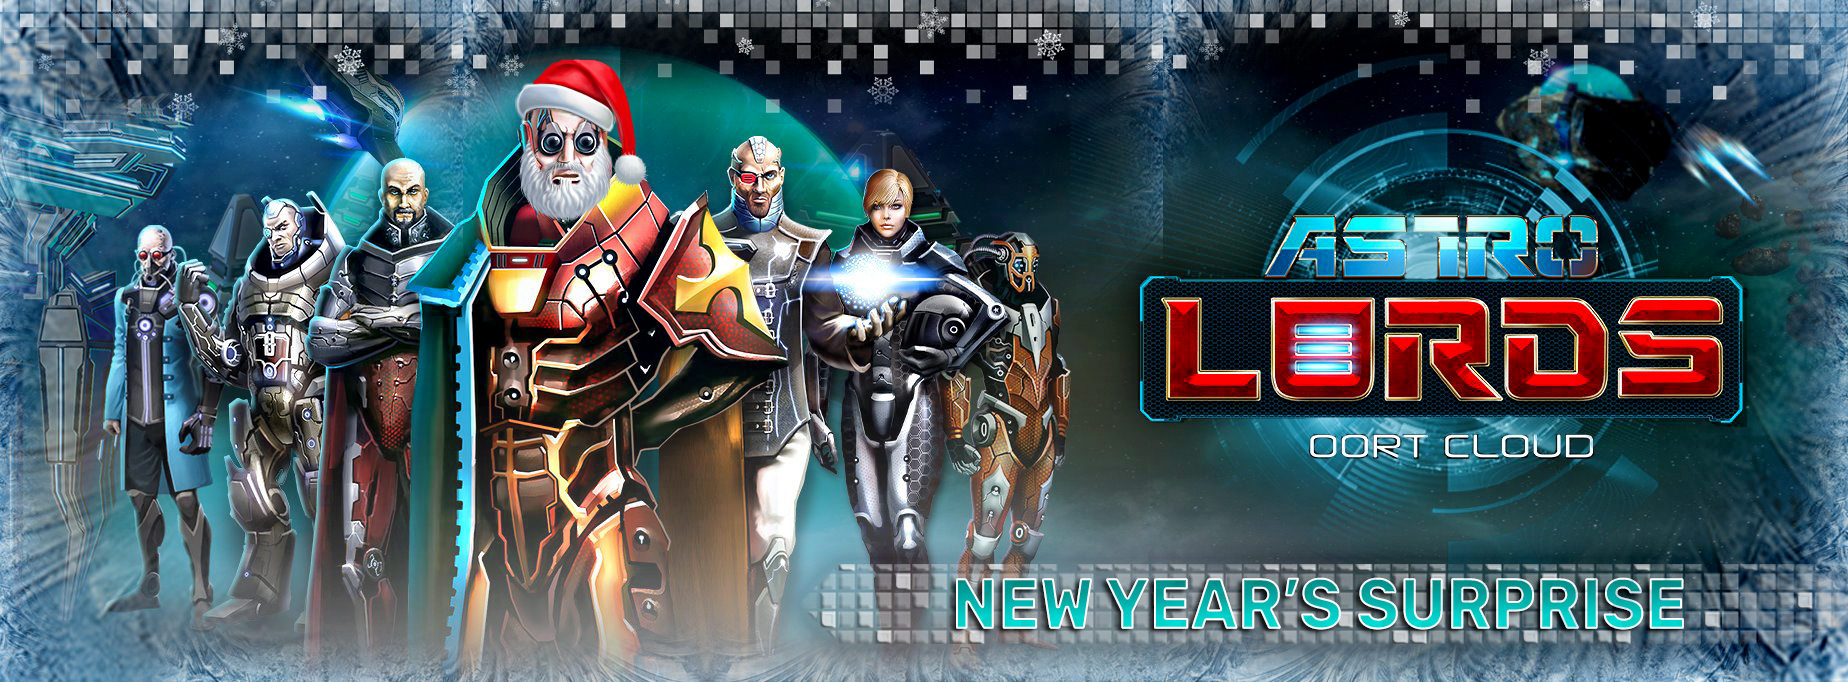 astrolords new year 2020 game strategy surprise